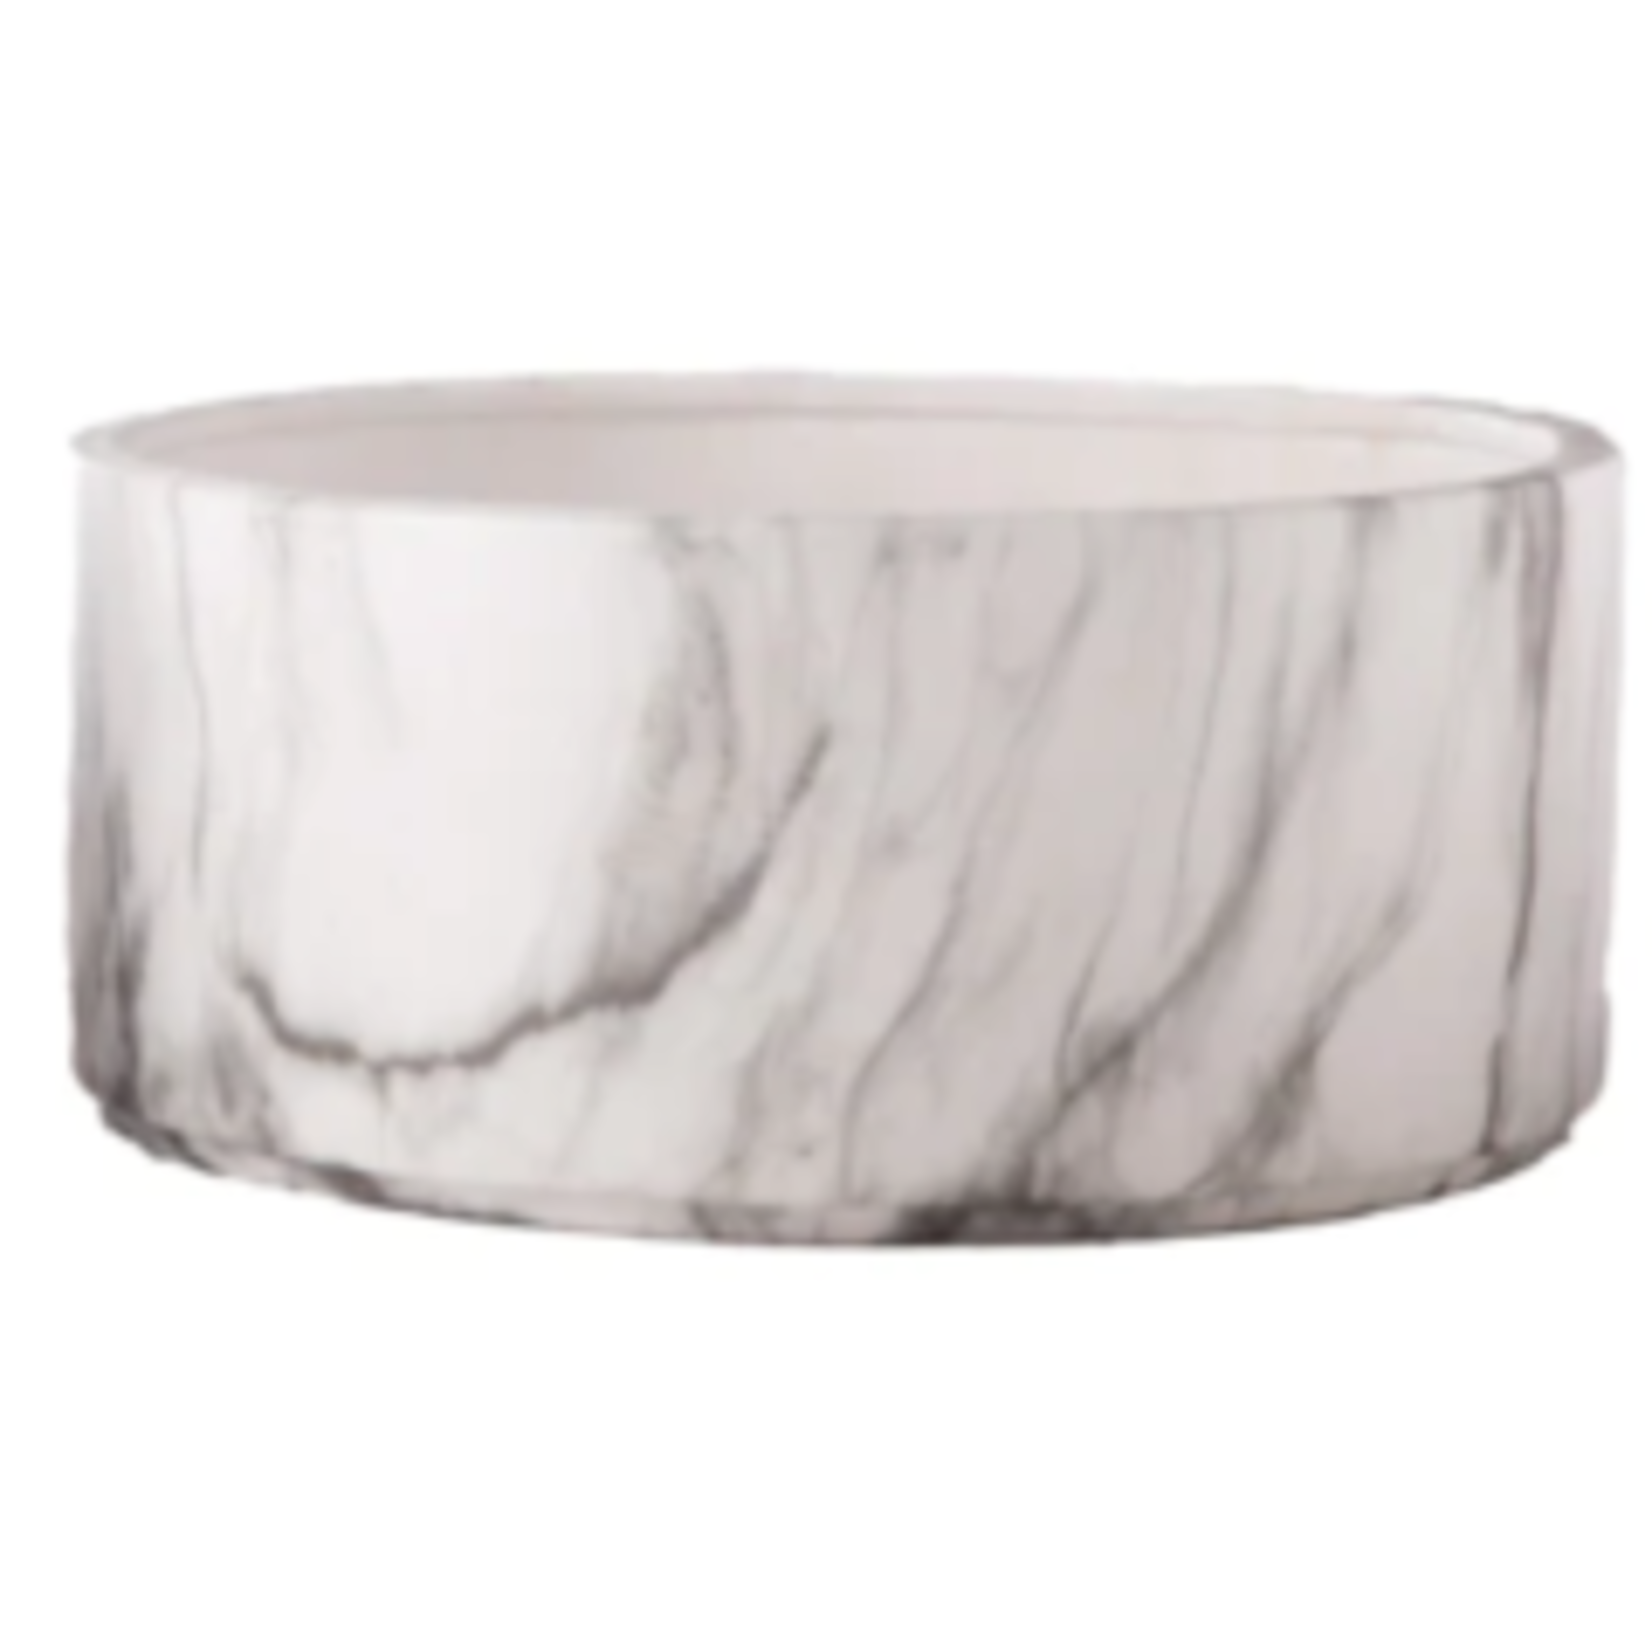 5.5”H X 12.5” LOW CYLINDER WHITE MARBLE WITH GOLD